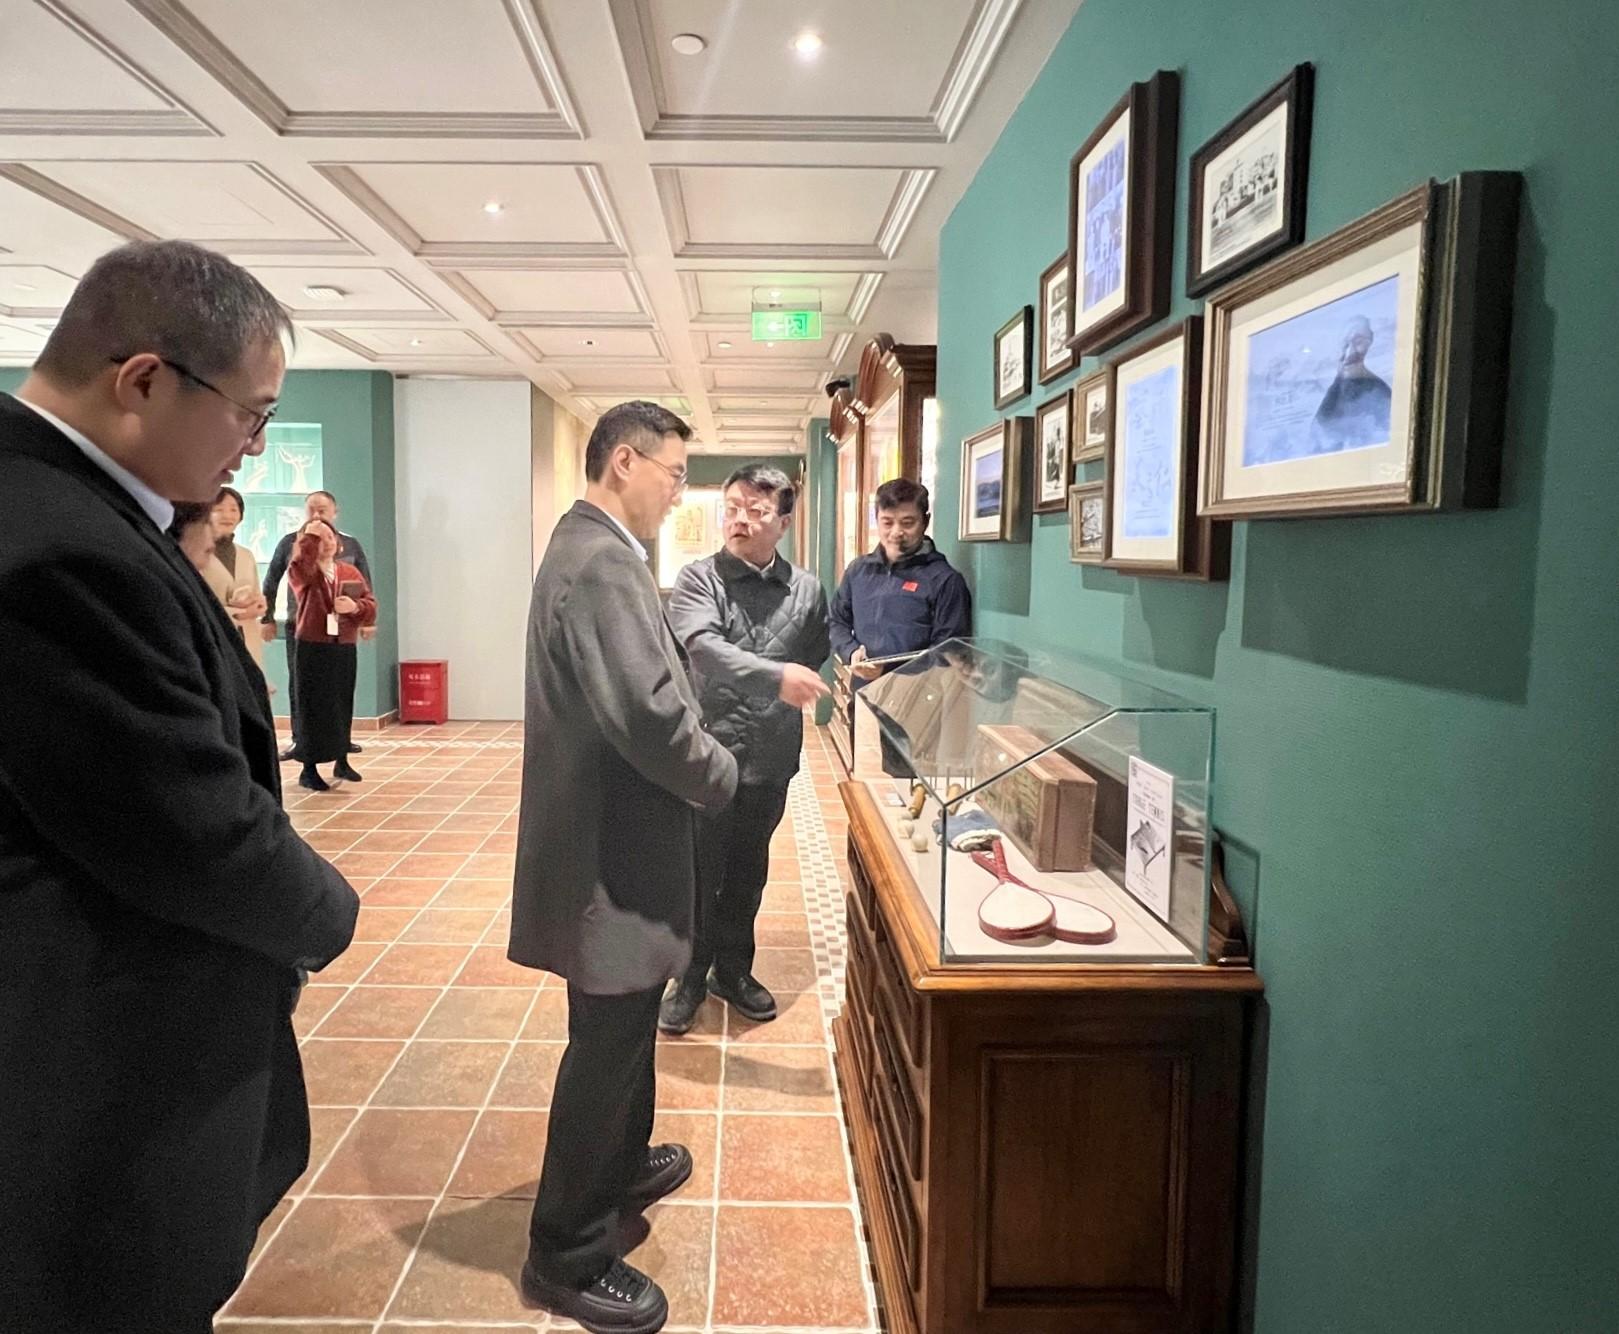 Accompanied by the Permanent Secretary for Culture, Sports and Tourism, Mr Joe Wong (first left), the Secretary for Culture, Sports and Tourism, Mr Kevin Yeung (third right), visits the Shanghai Sports Museum today (January 9) to learn more about the sports history and development of Shanghai.